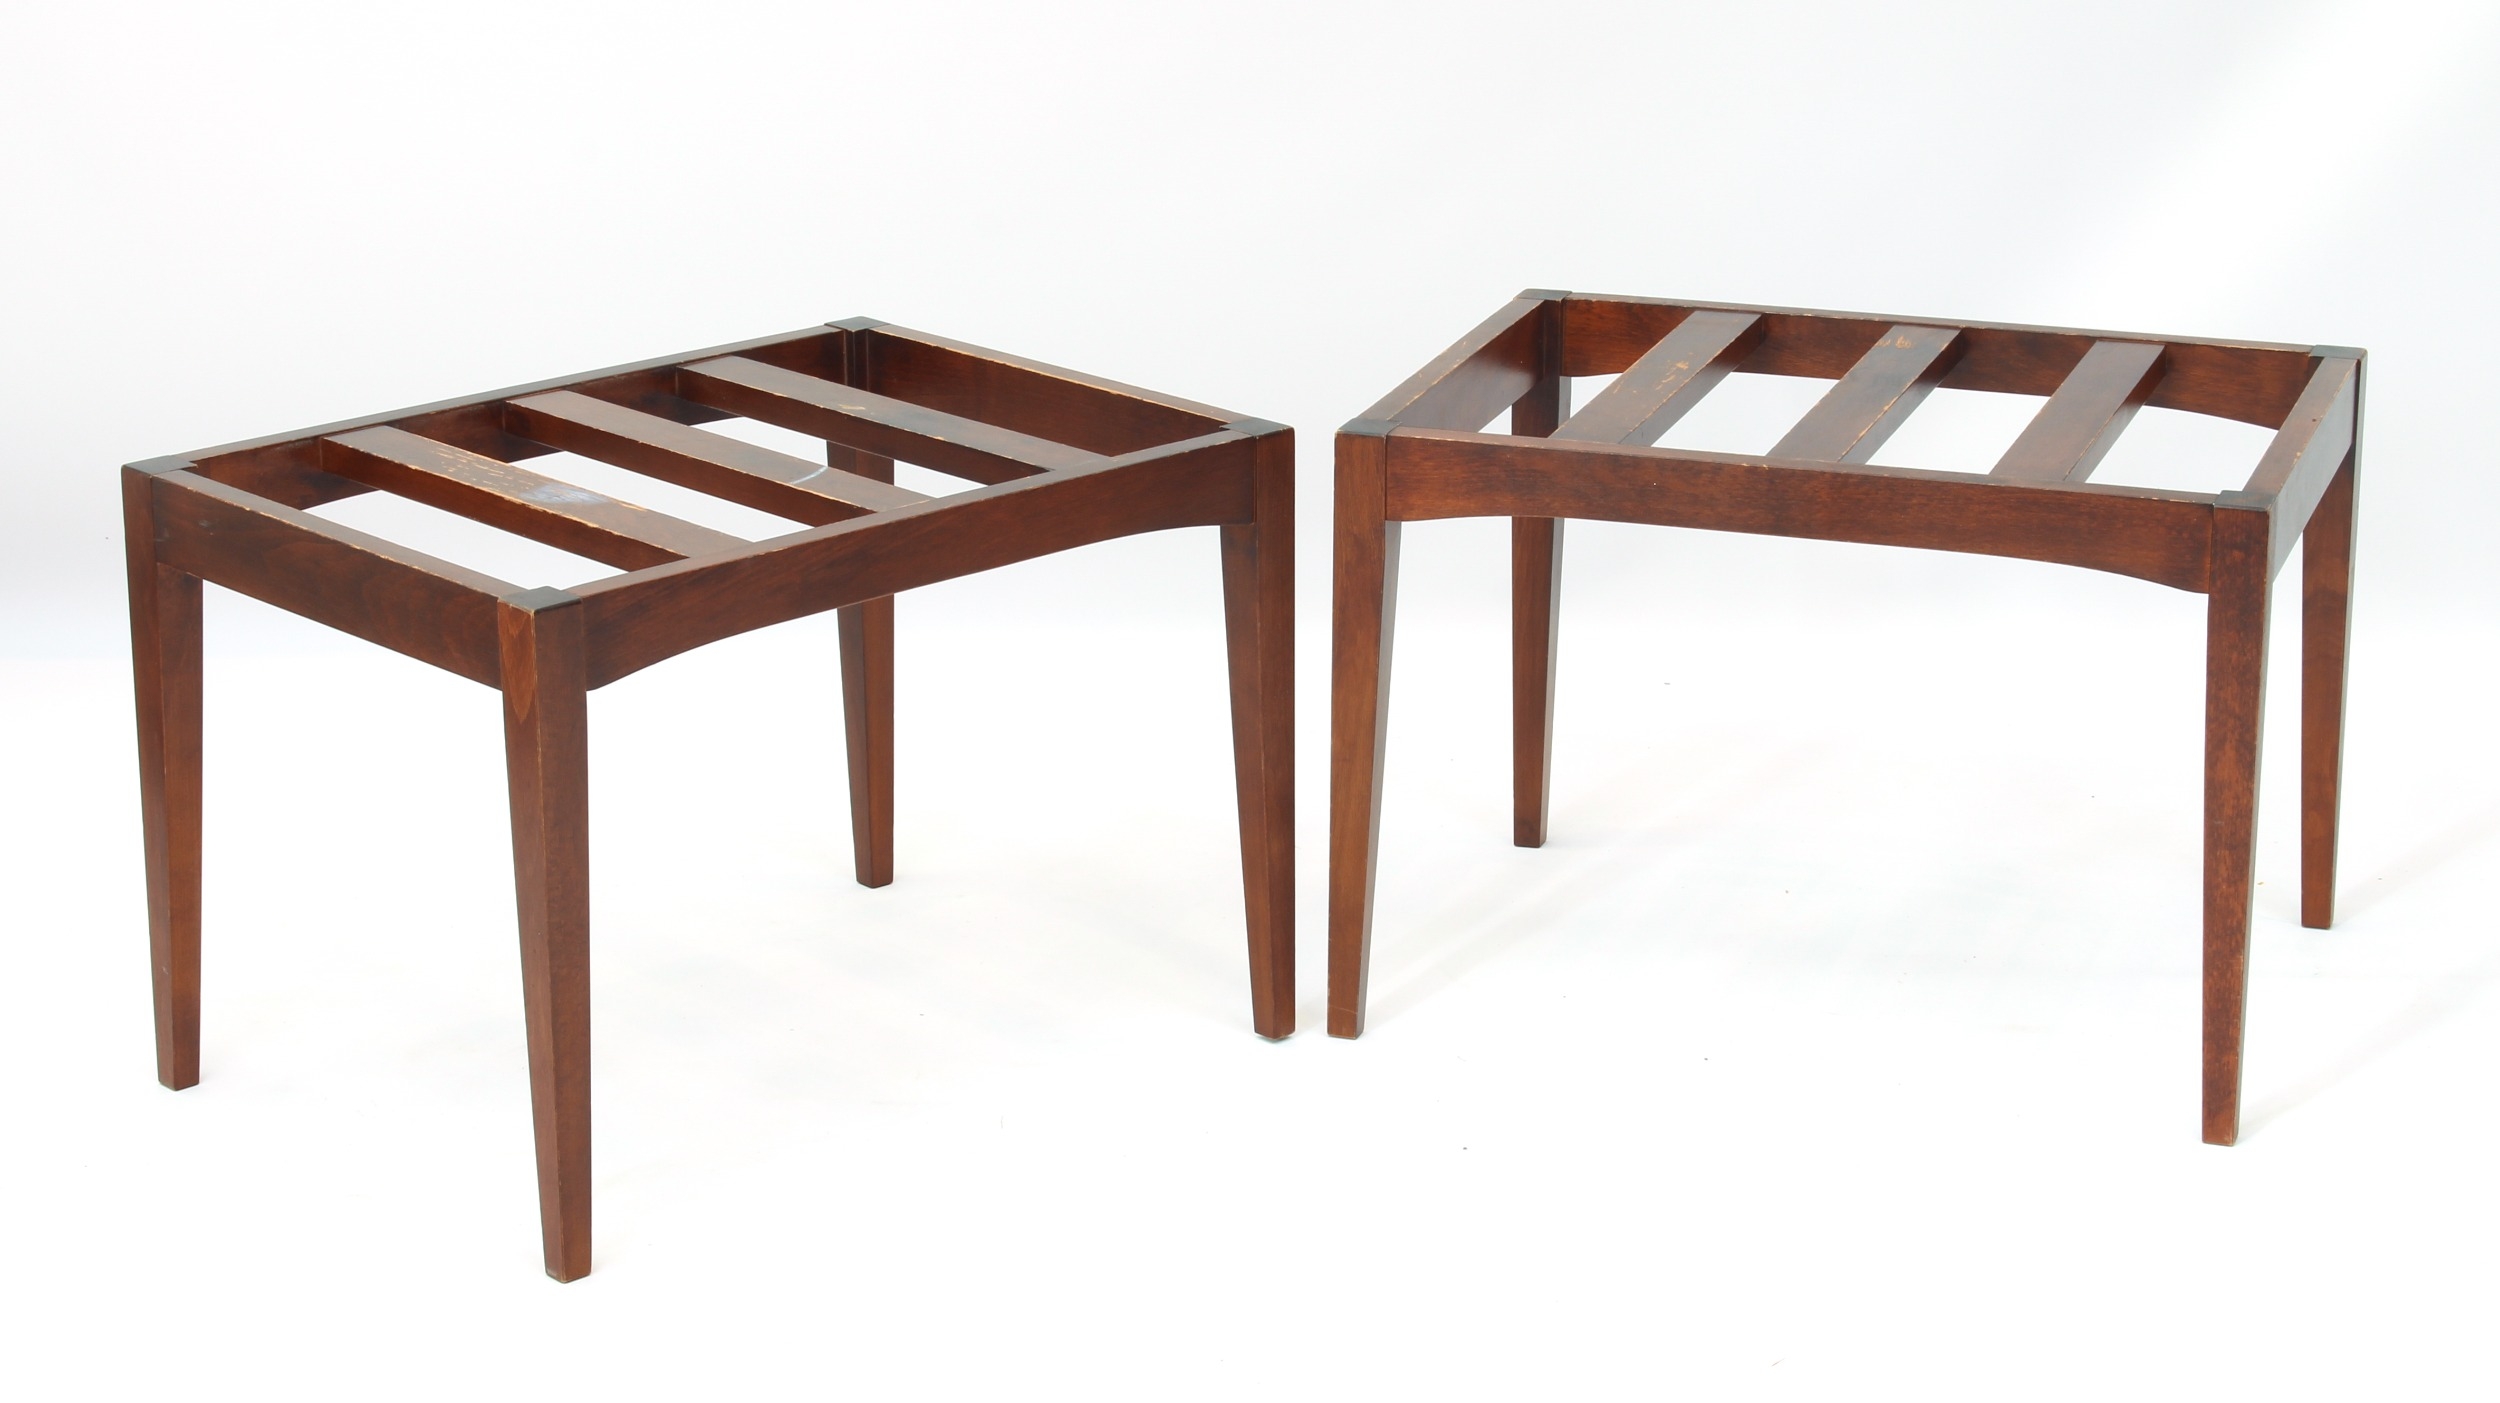 A pair of stained beech slat-top luggage racks - raised on square tapered supports (LWH 58.5 x 43